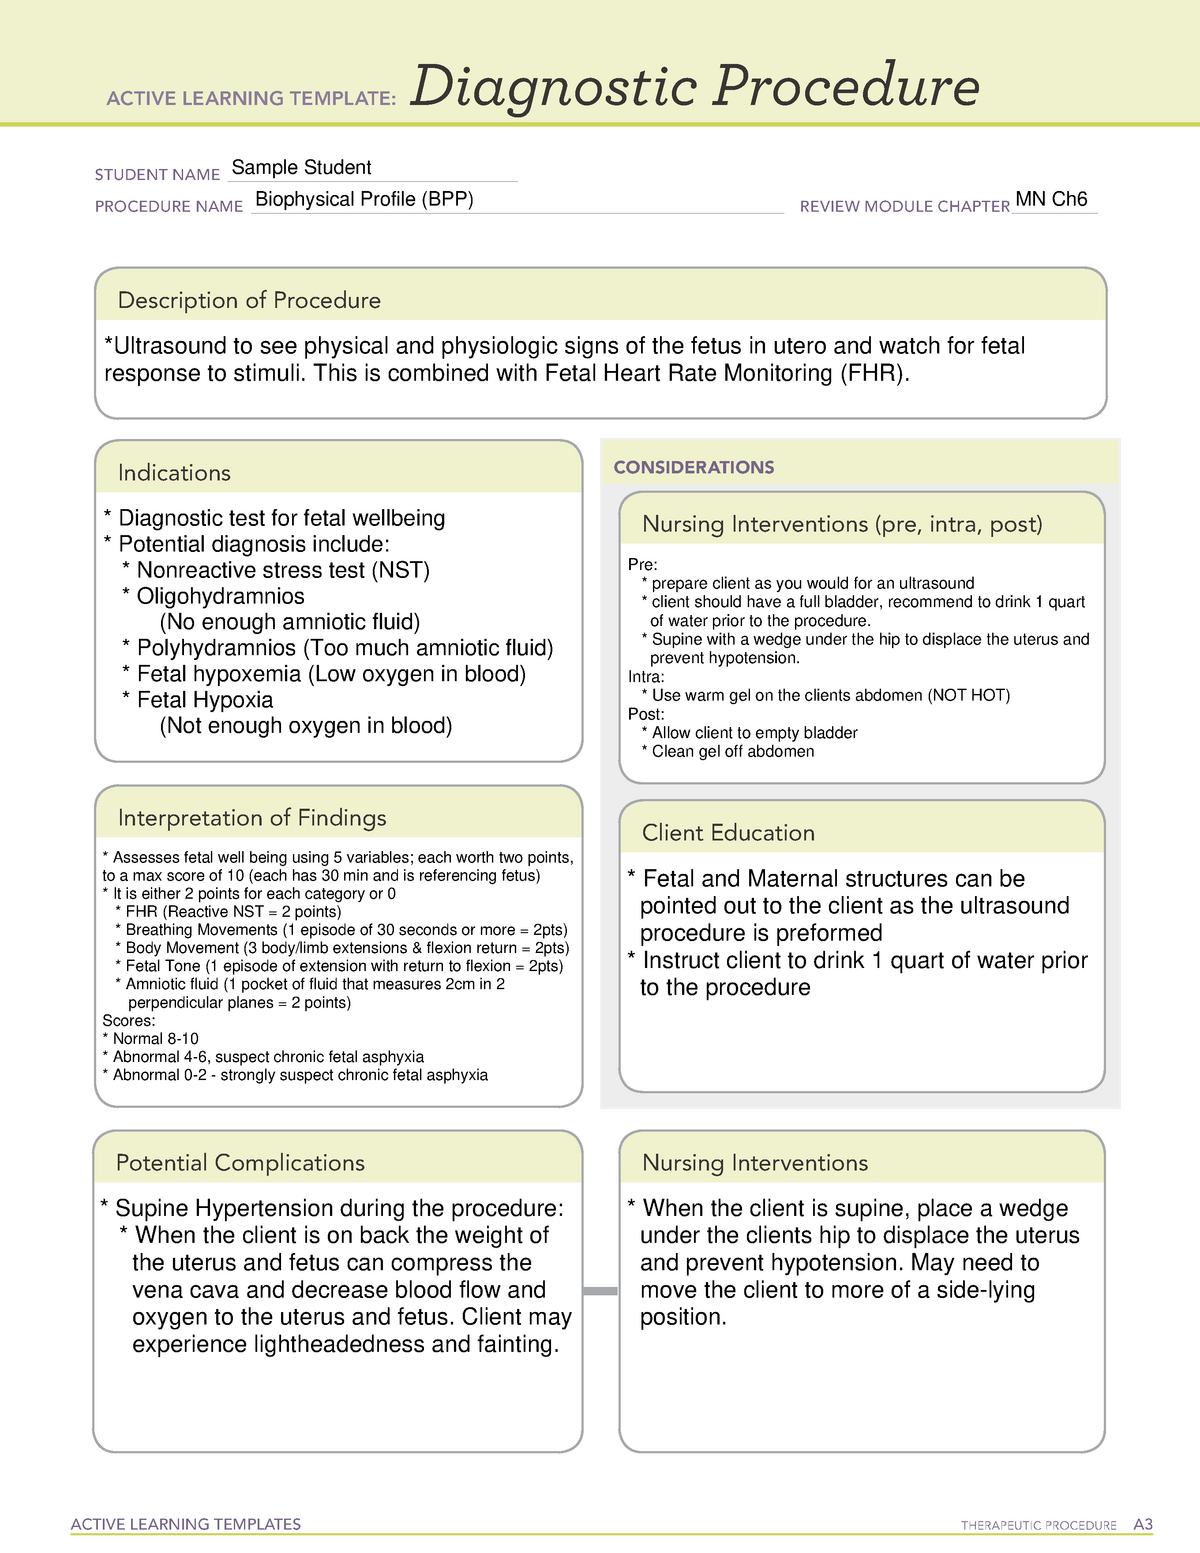 Diagnostic procedure sample ####### ACTIVE LEARNING TEMPLATES